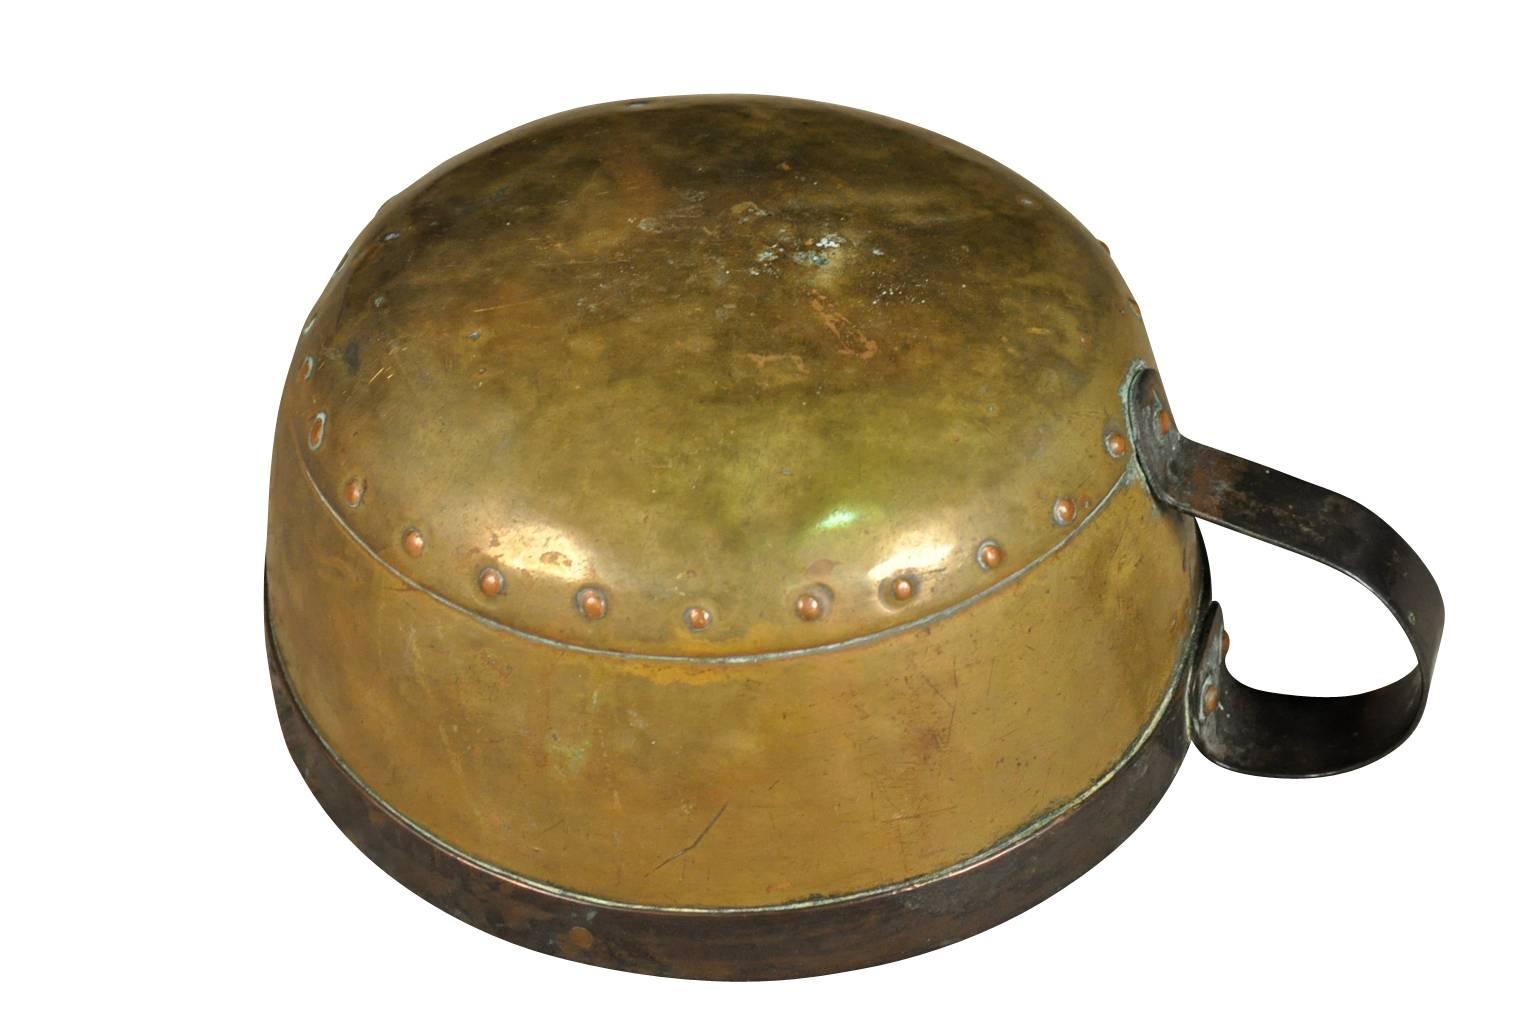 A very beautiful early 18th century riveted copper vessel or bowl with an iron handle. A charming and warm accent piece for any kitchen, living area or bath.